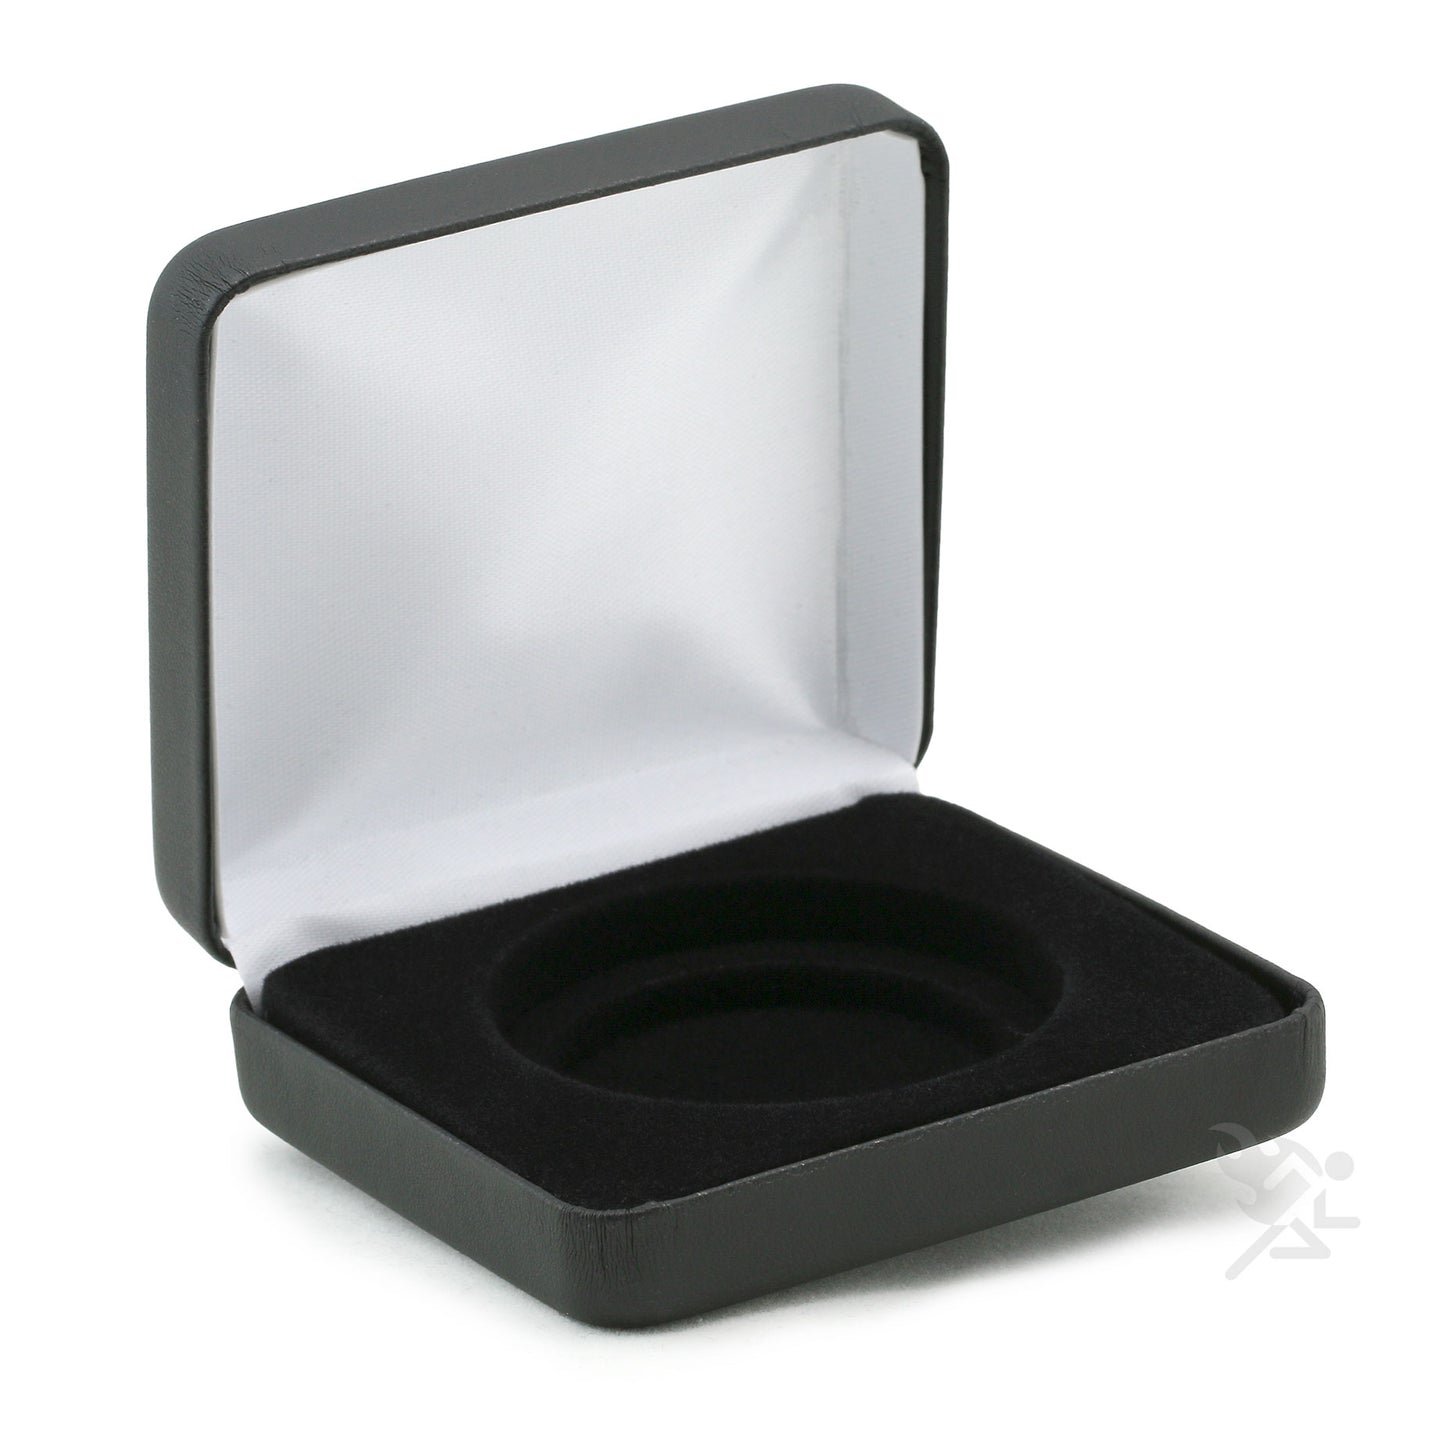 Coin Display Box for AirTite XXL - Model "X" Coin Holders